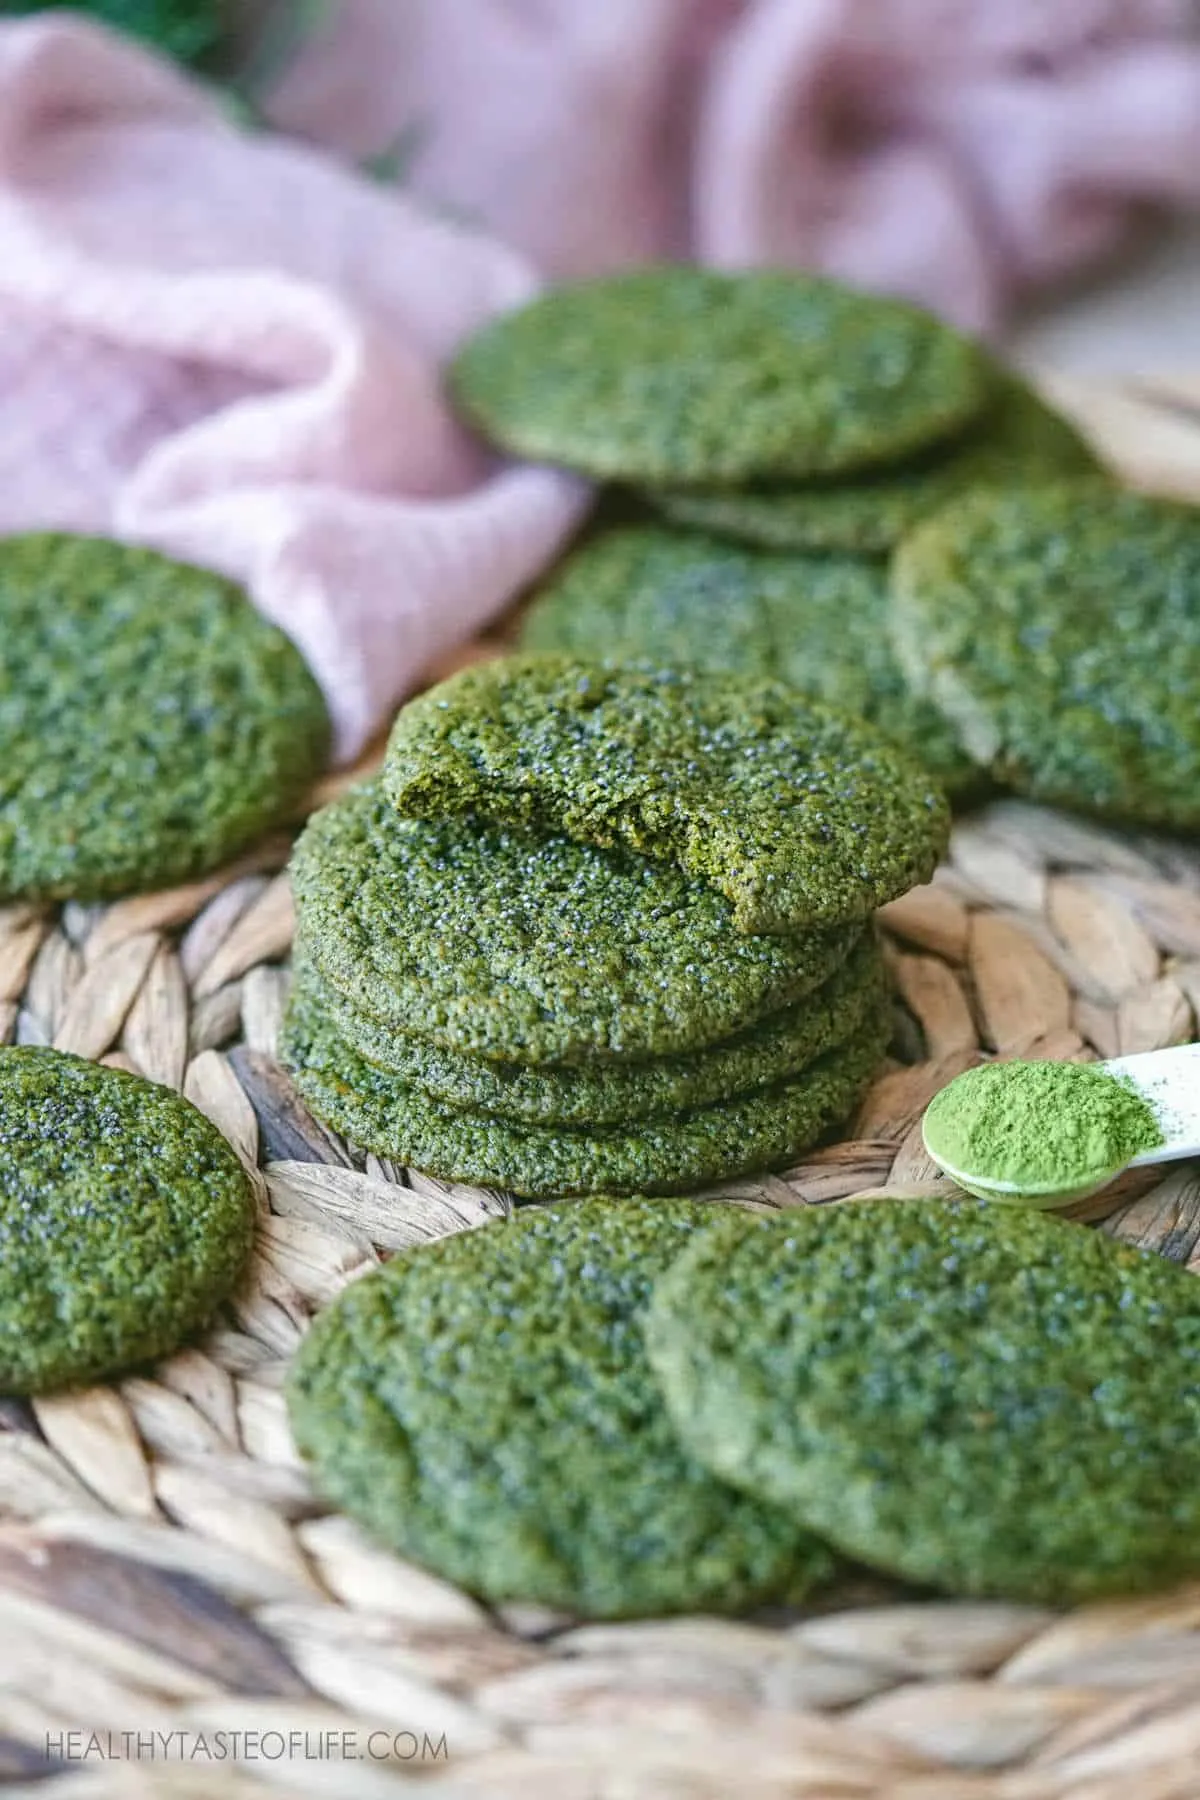 Healthy Vegan Matcha Cookies Recipe - Gluten Free Matcha Sugar Cookies With Oatmeal. Make matcha cookies from scratch with healthier ingredients: chewy inside, crisp on the outside: a healthy matcha dessert for your cup of tea #matchacookies #vegan #healthycookies #healthyoatmealcookies #glutenfreecookies #healthysugarcookies